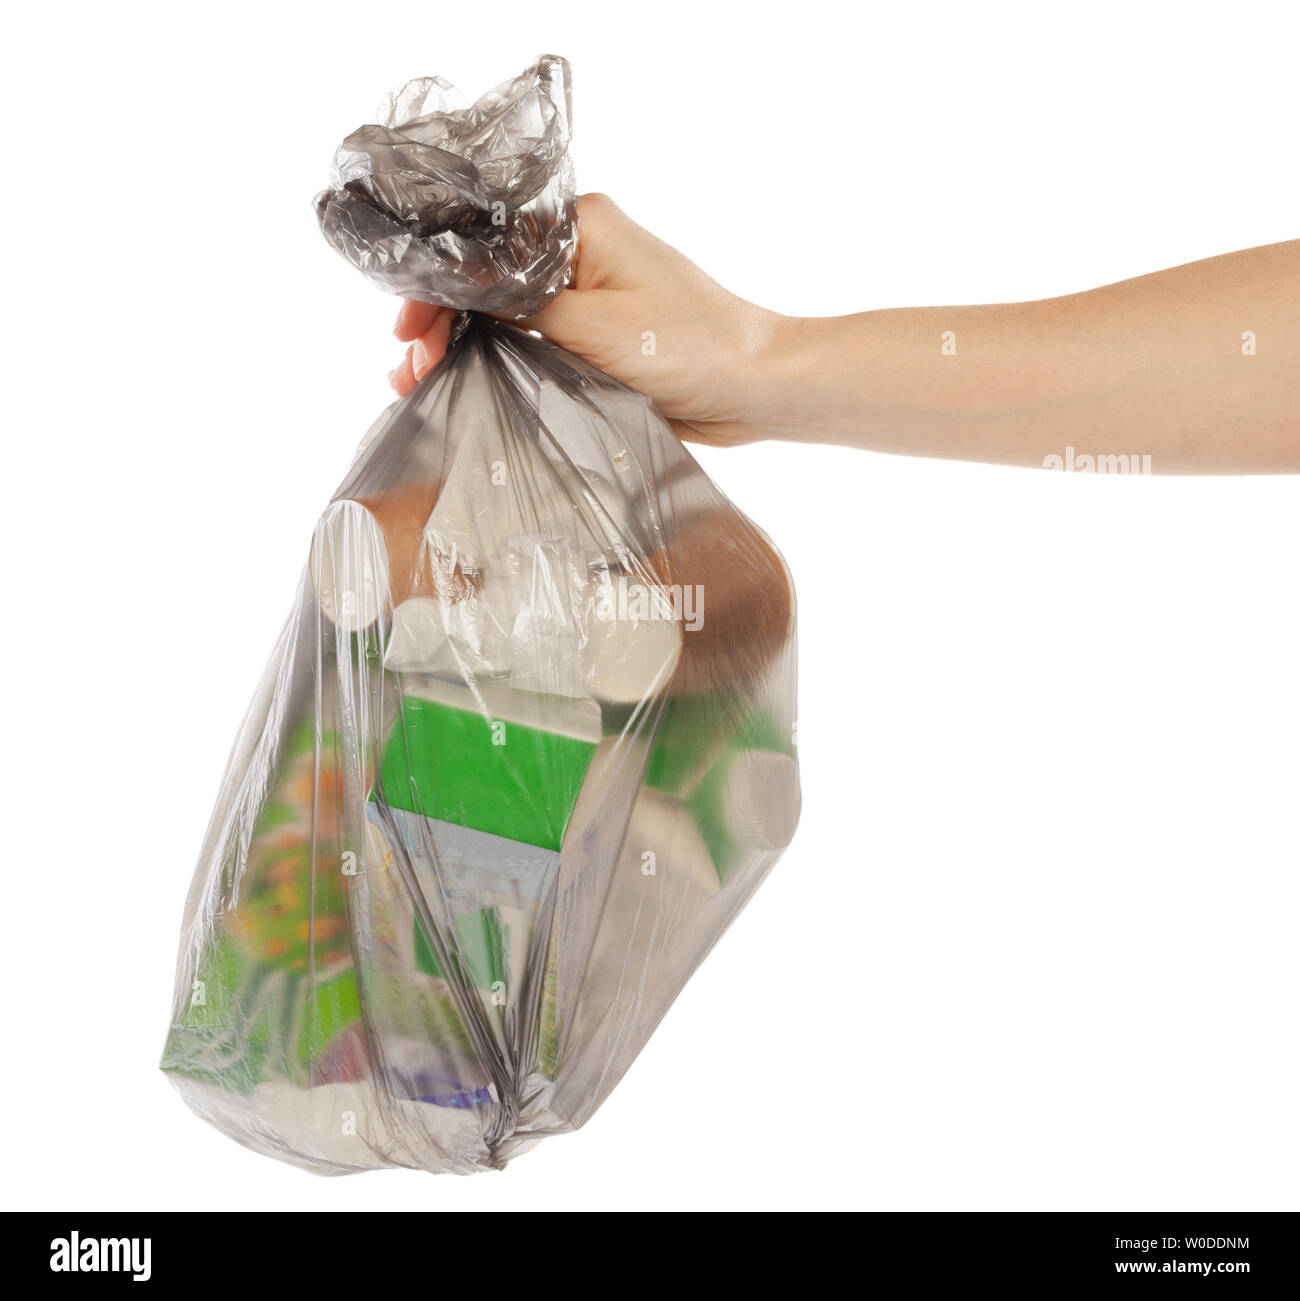 https://c8.alamy.com/comp/W0DDNM/woman-hands-holding-garbage-bag-isolated-on-white-background-W0DDNM.jpg